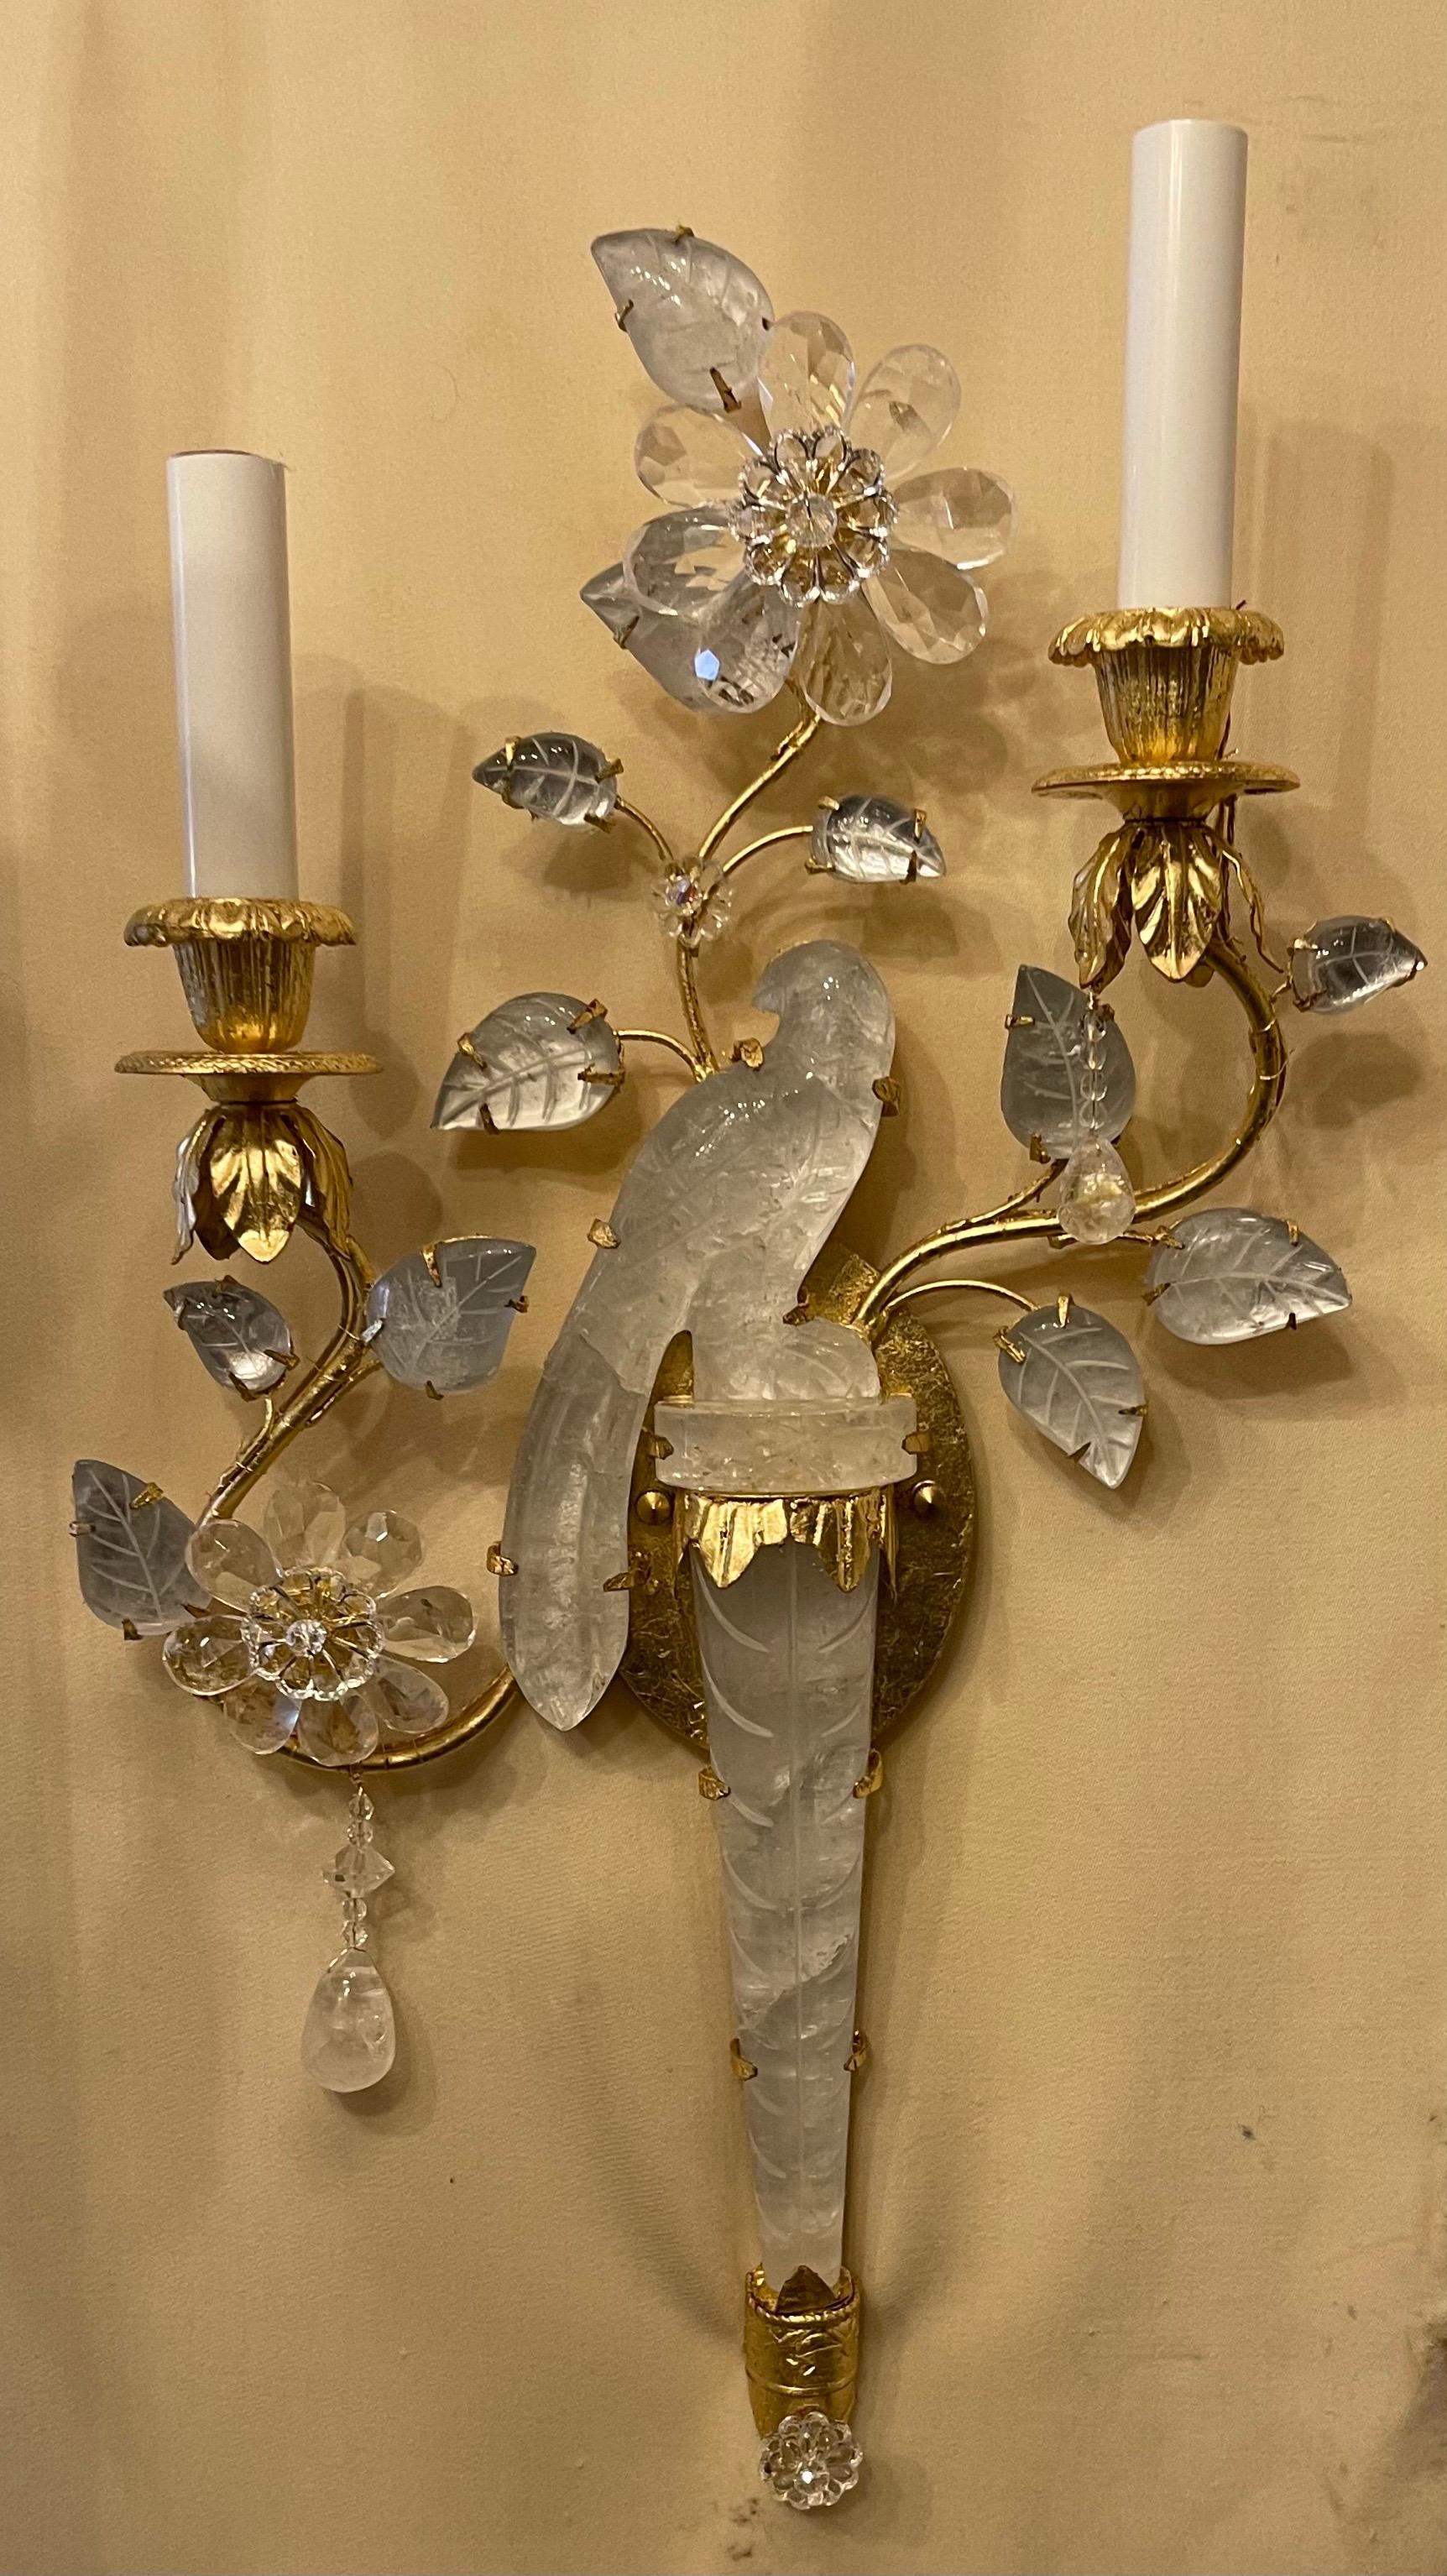 A wonderful pair of Baguès style two-arm gold gilt rock crystal bird urn and leaf form petite sconces

Second pair is also available 
Sold separately.